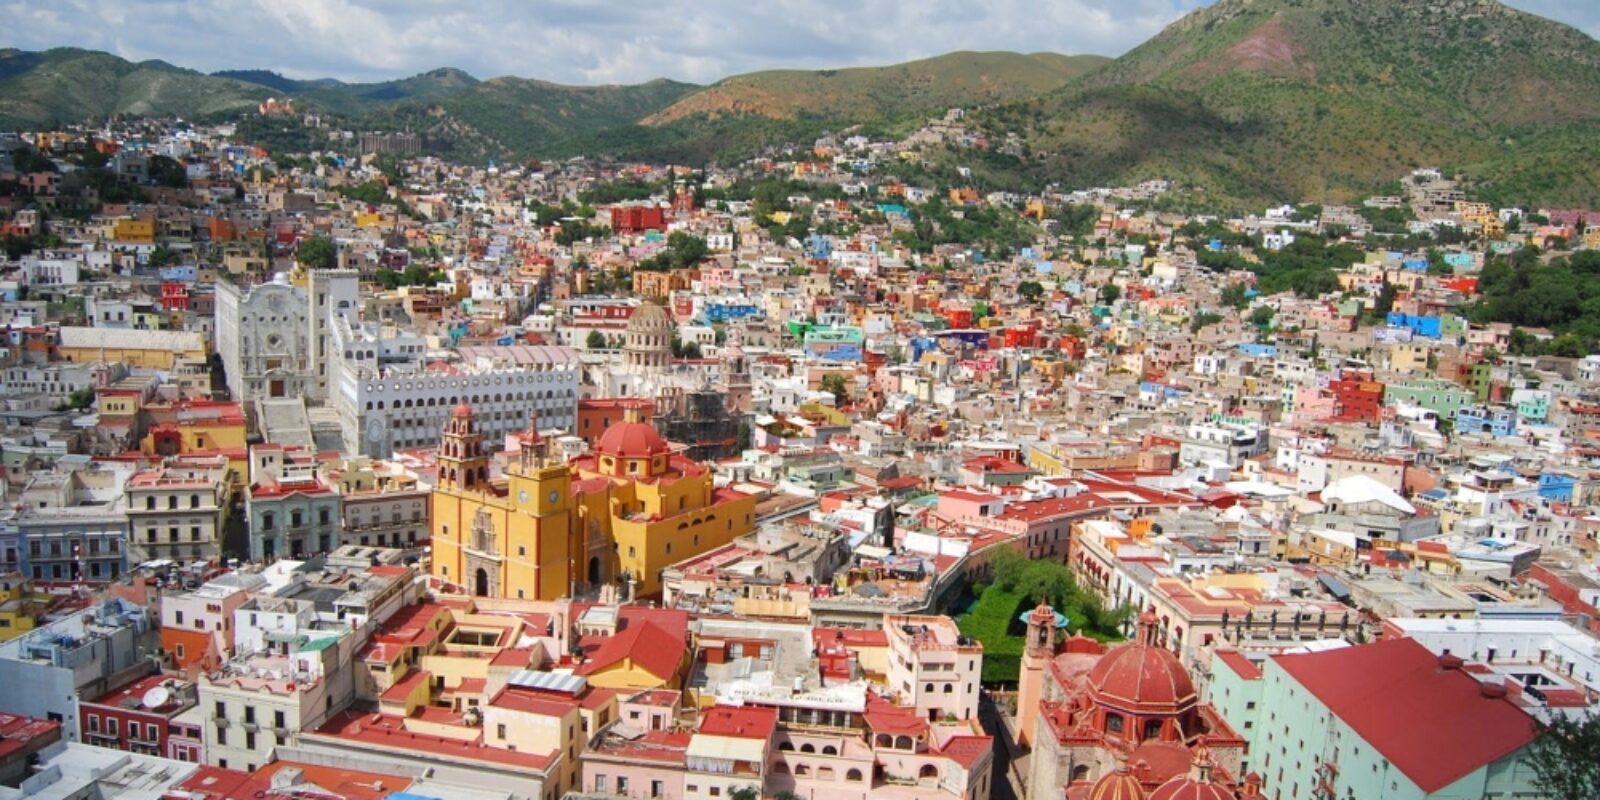 An aerial view of Mexican city for the article about "senior trips to Mexico City."